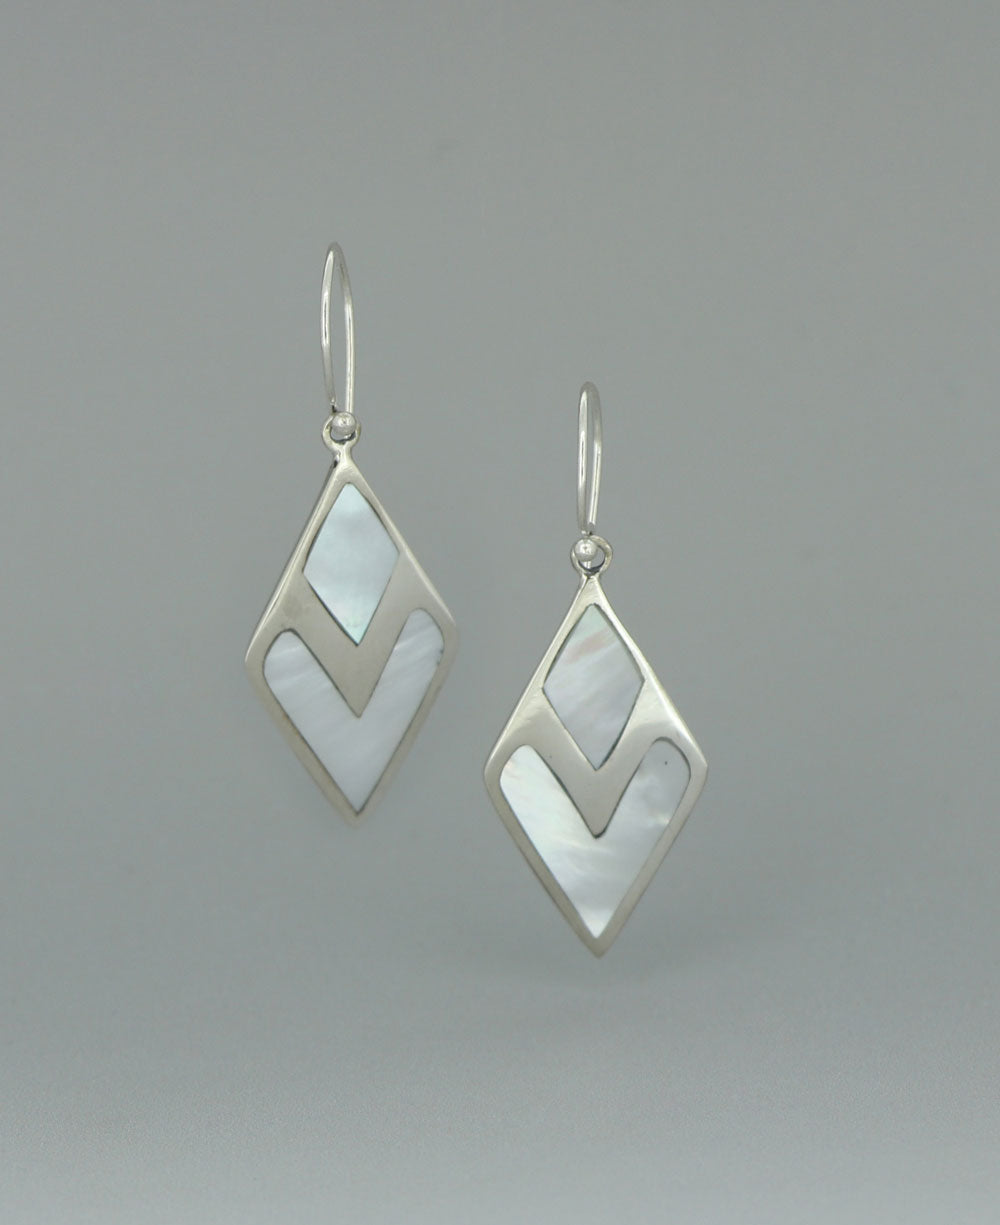 Full view of the sterling silver Mother of Pearl earrings against a light background, showcasing the geometric design and luminous shell inlay